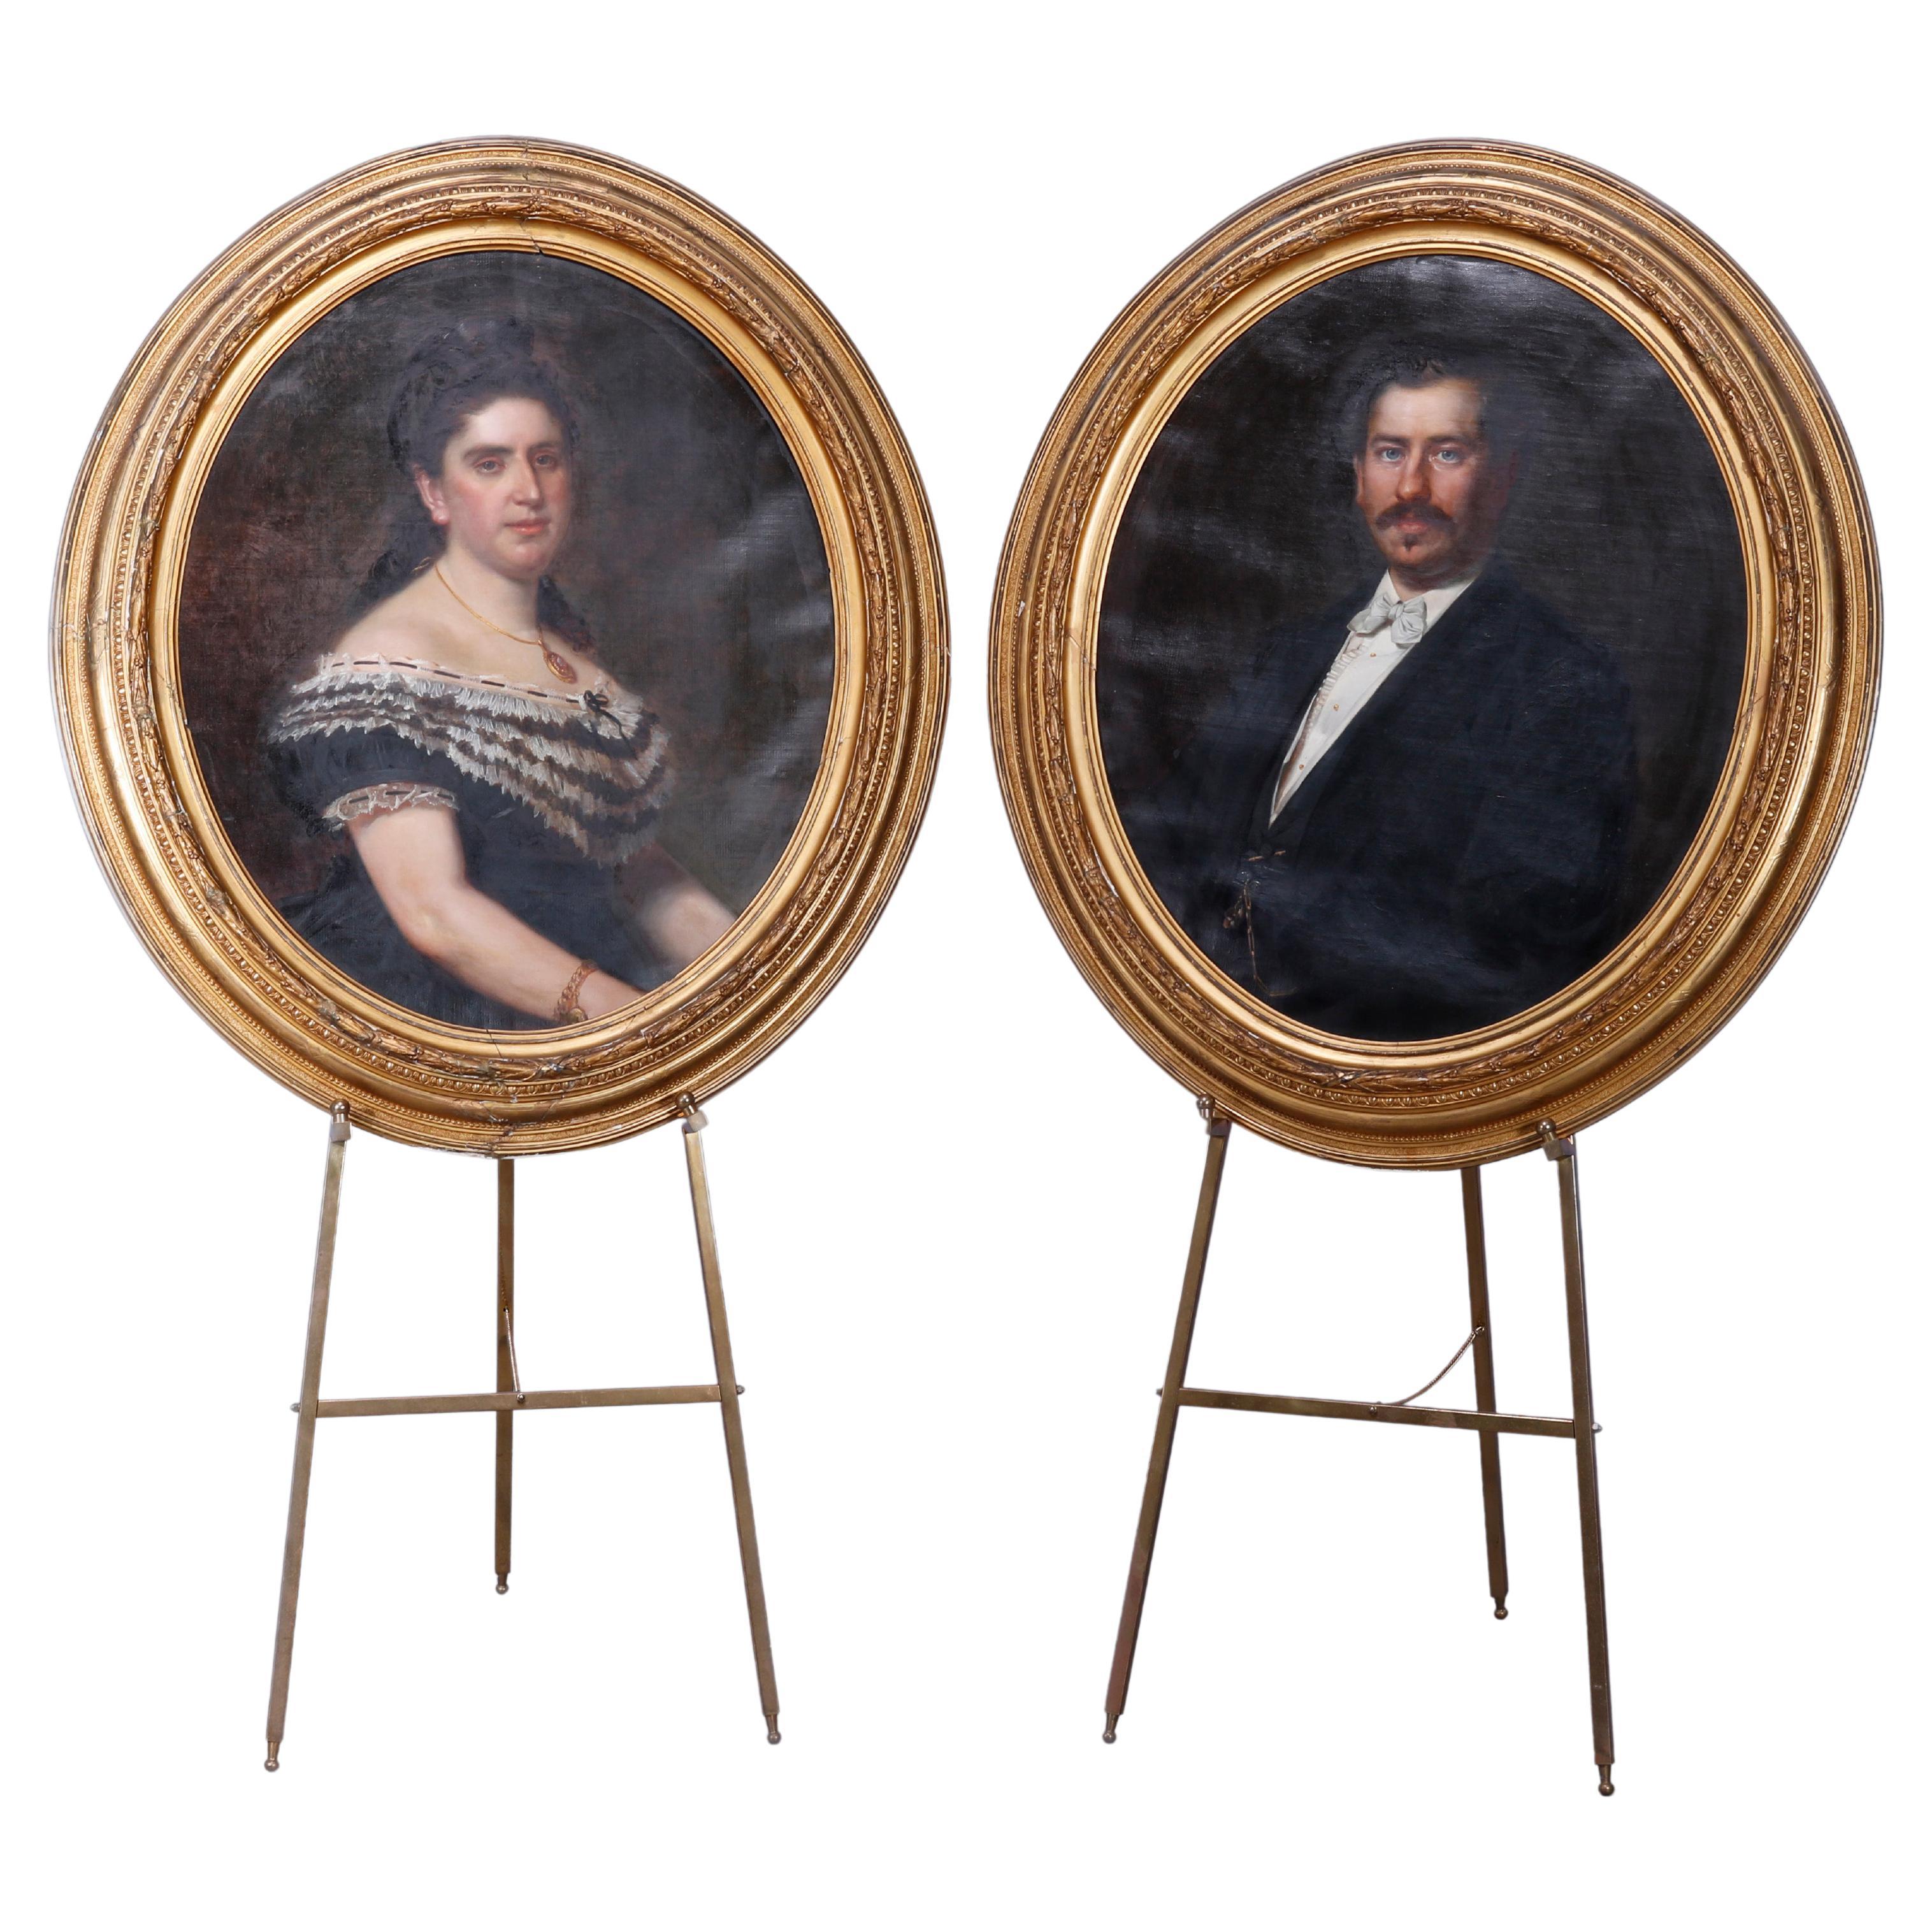 Antique Pair Large Portrait Paintings in First Finish Giltwood Frames, c1870